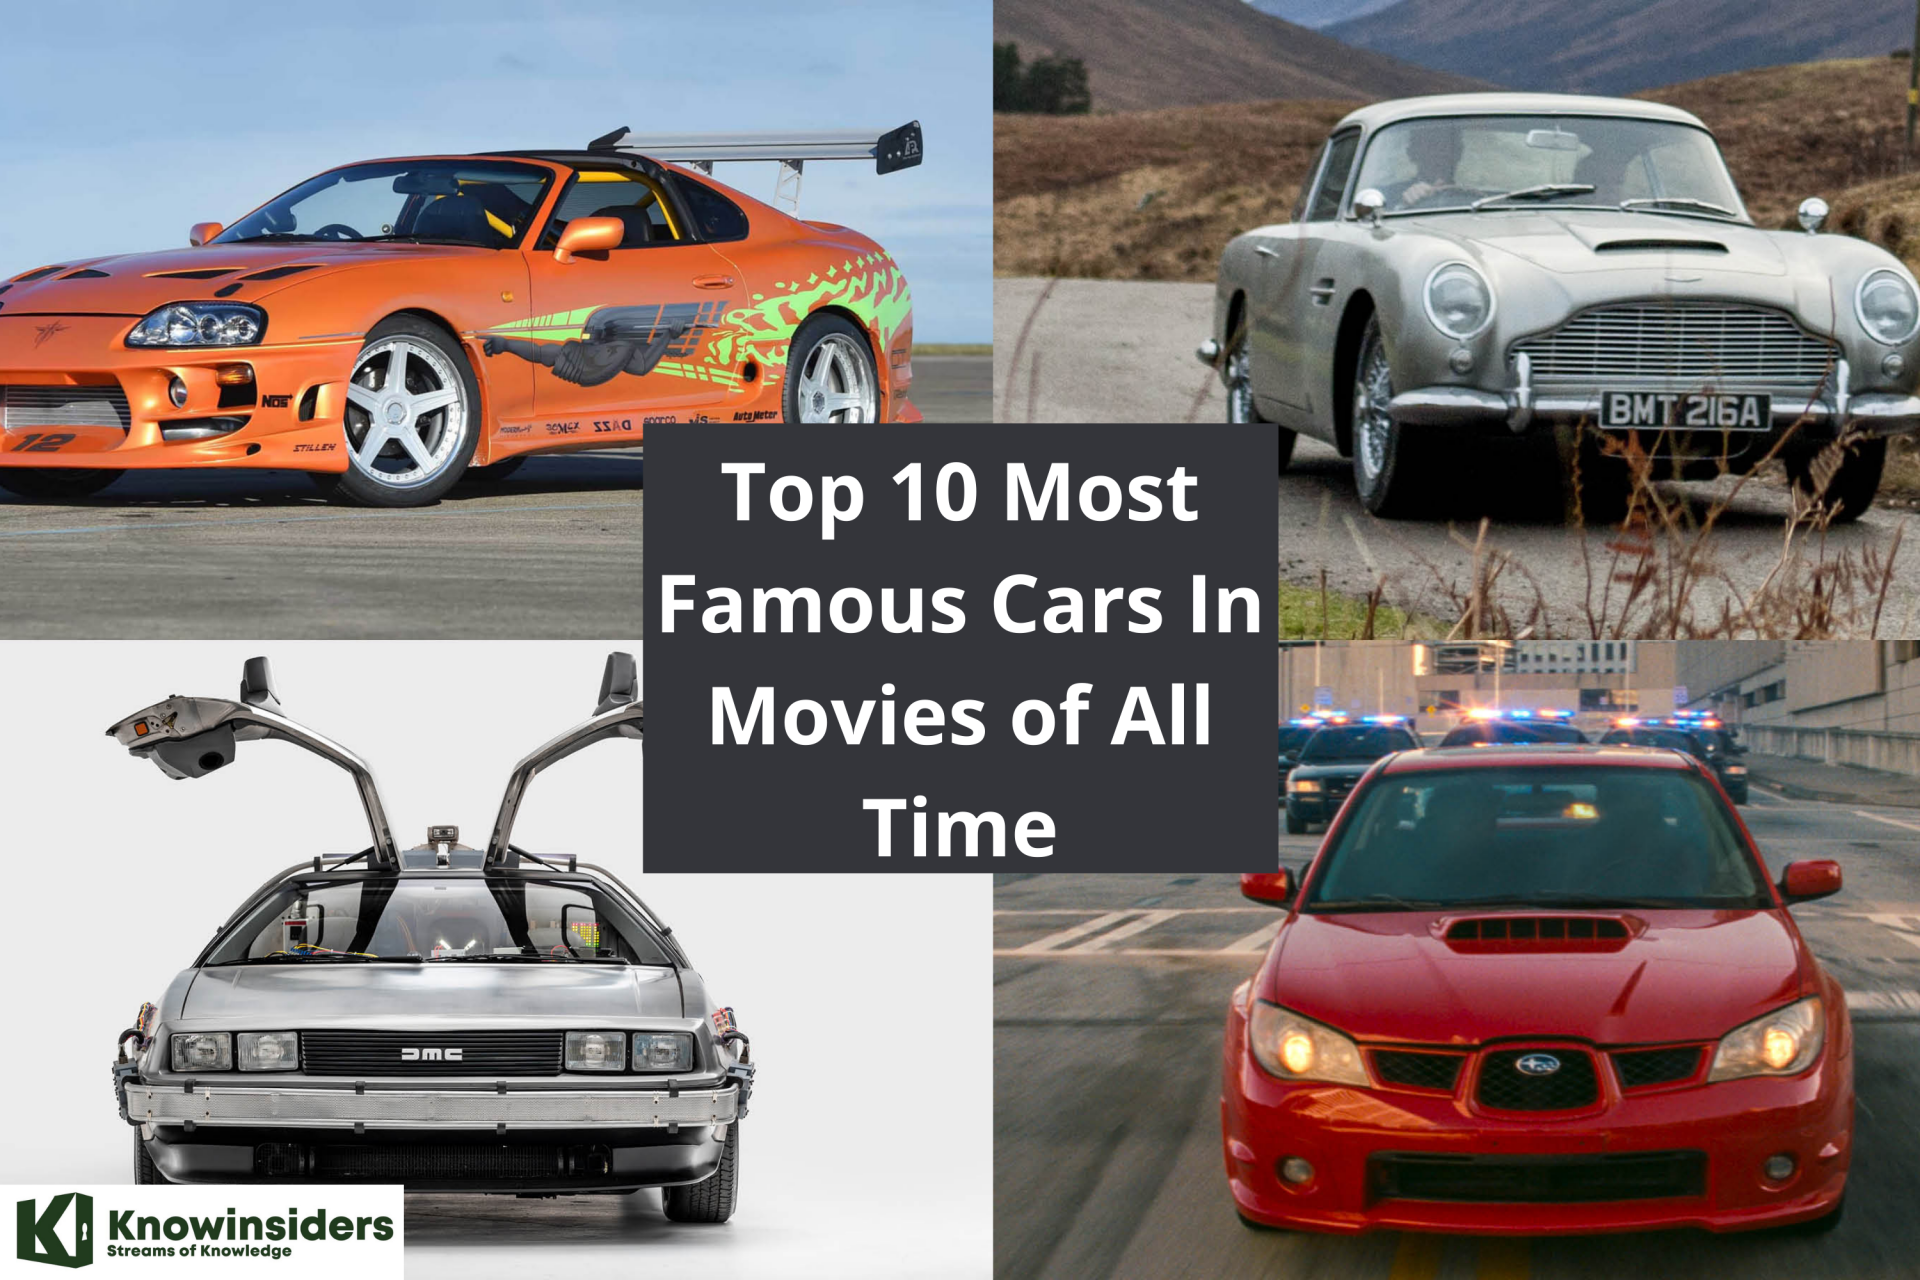 Top 10 Most Famous Cars In Movies of All Time